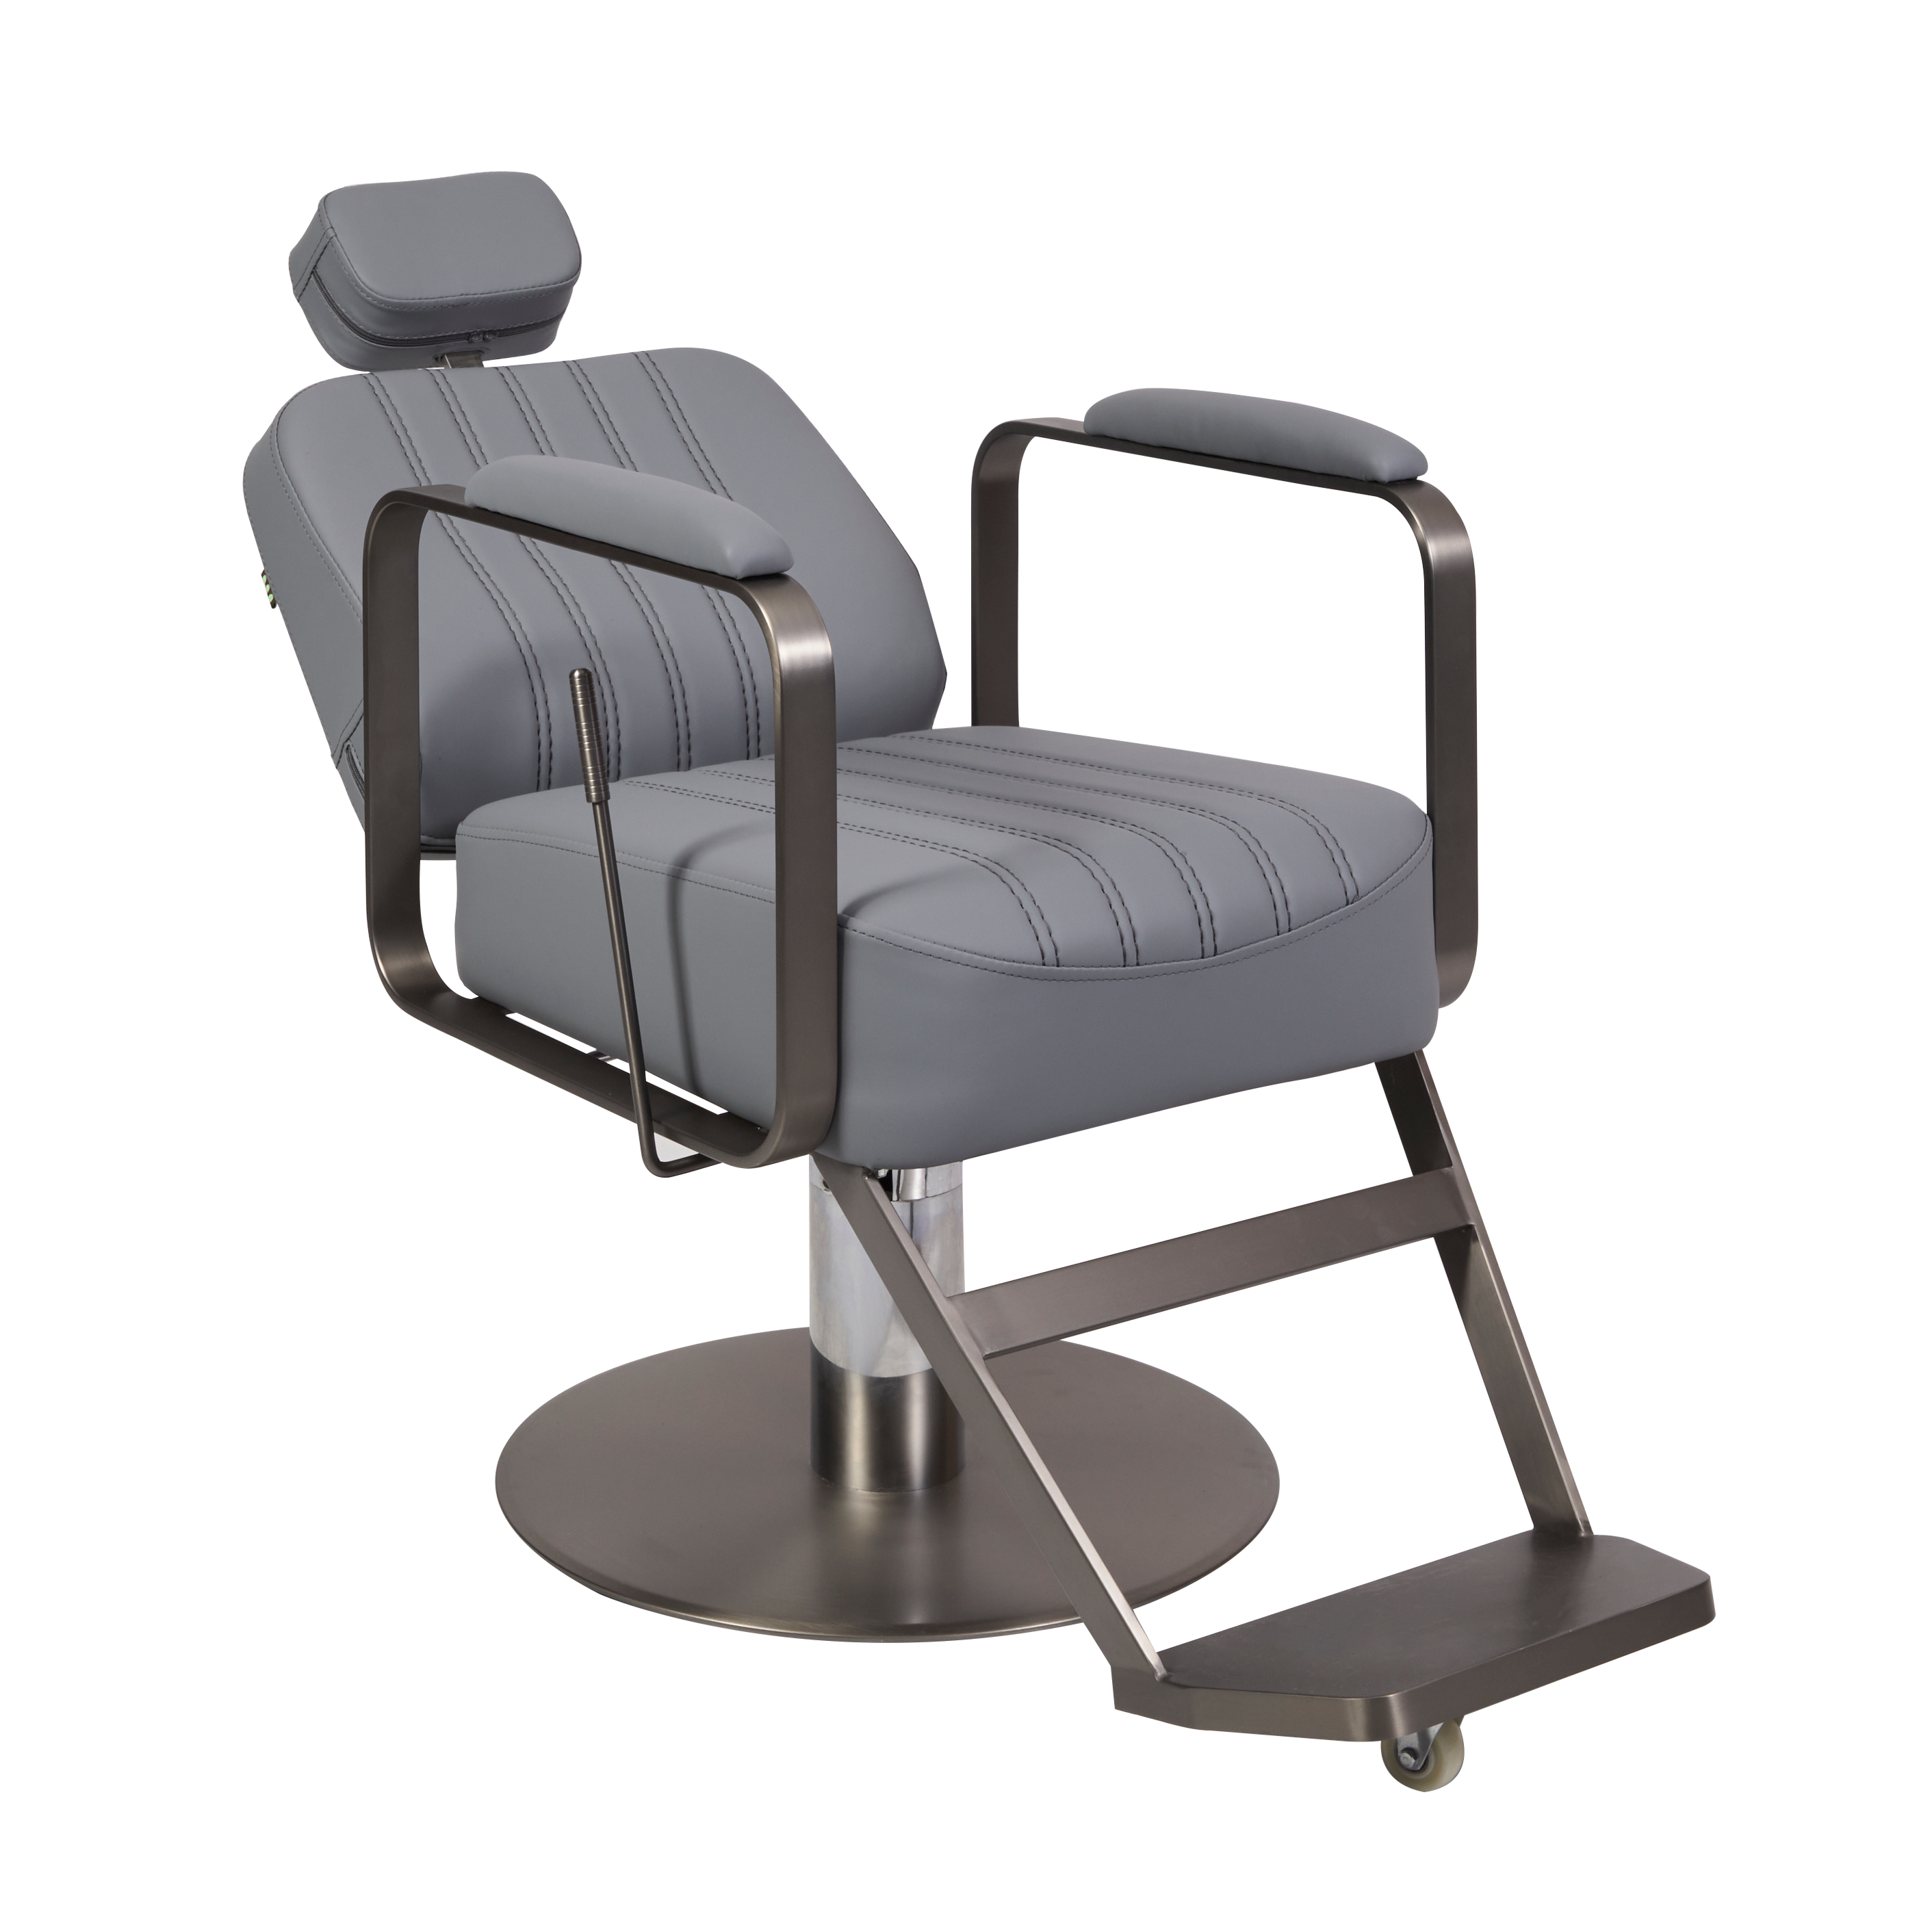 The Lexi Reclining Chair - steel Grey & Graphite by BEC